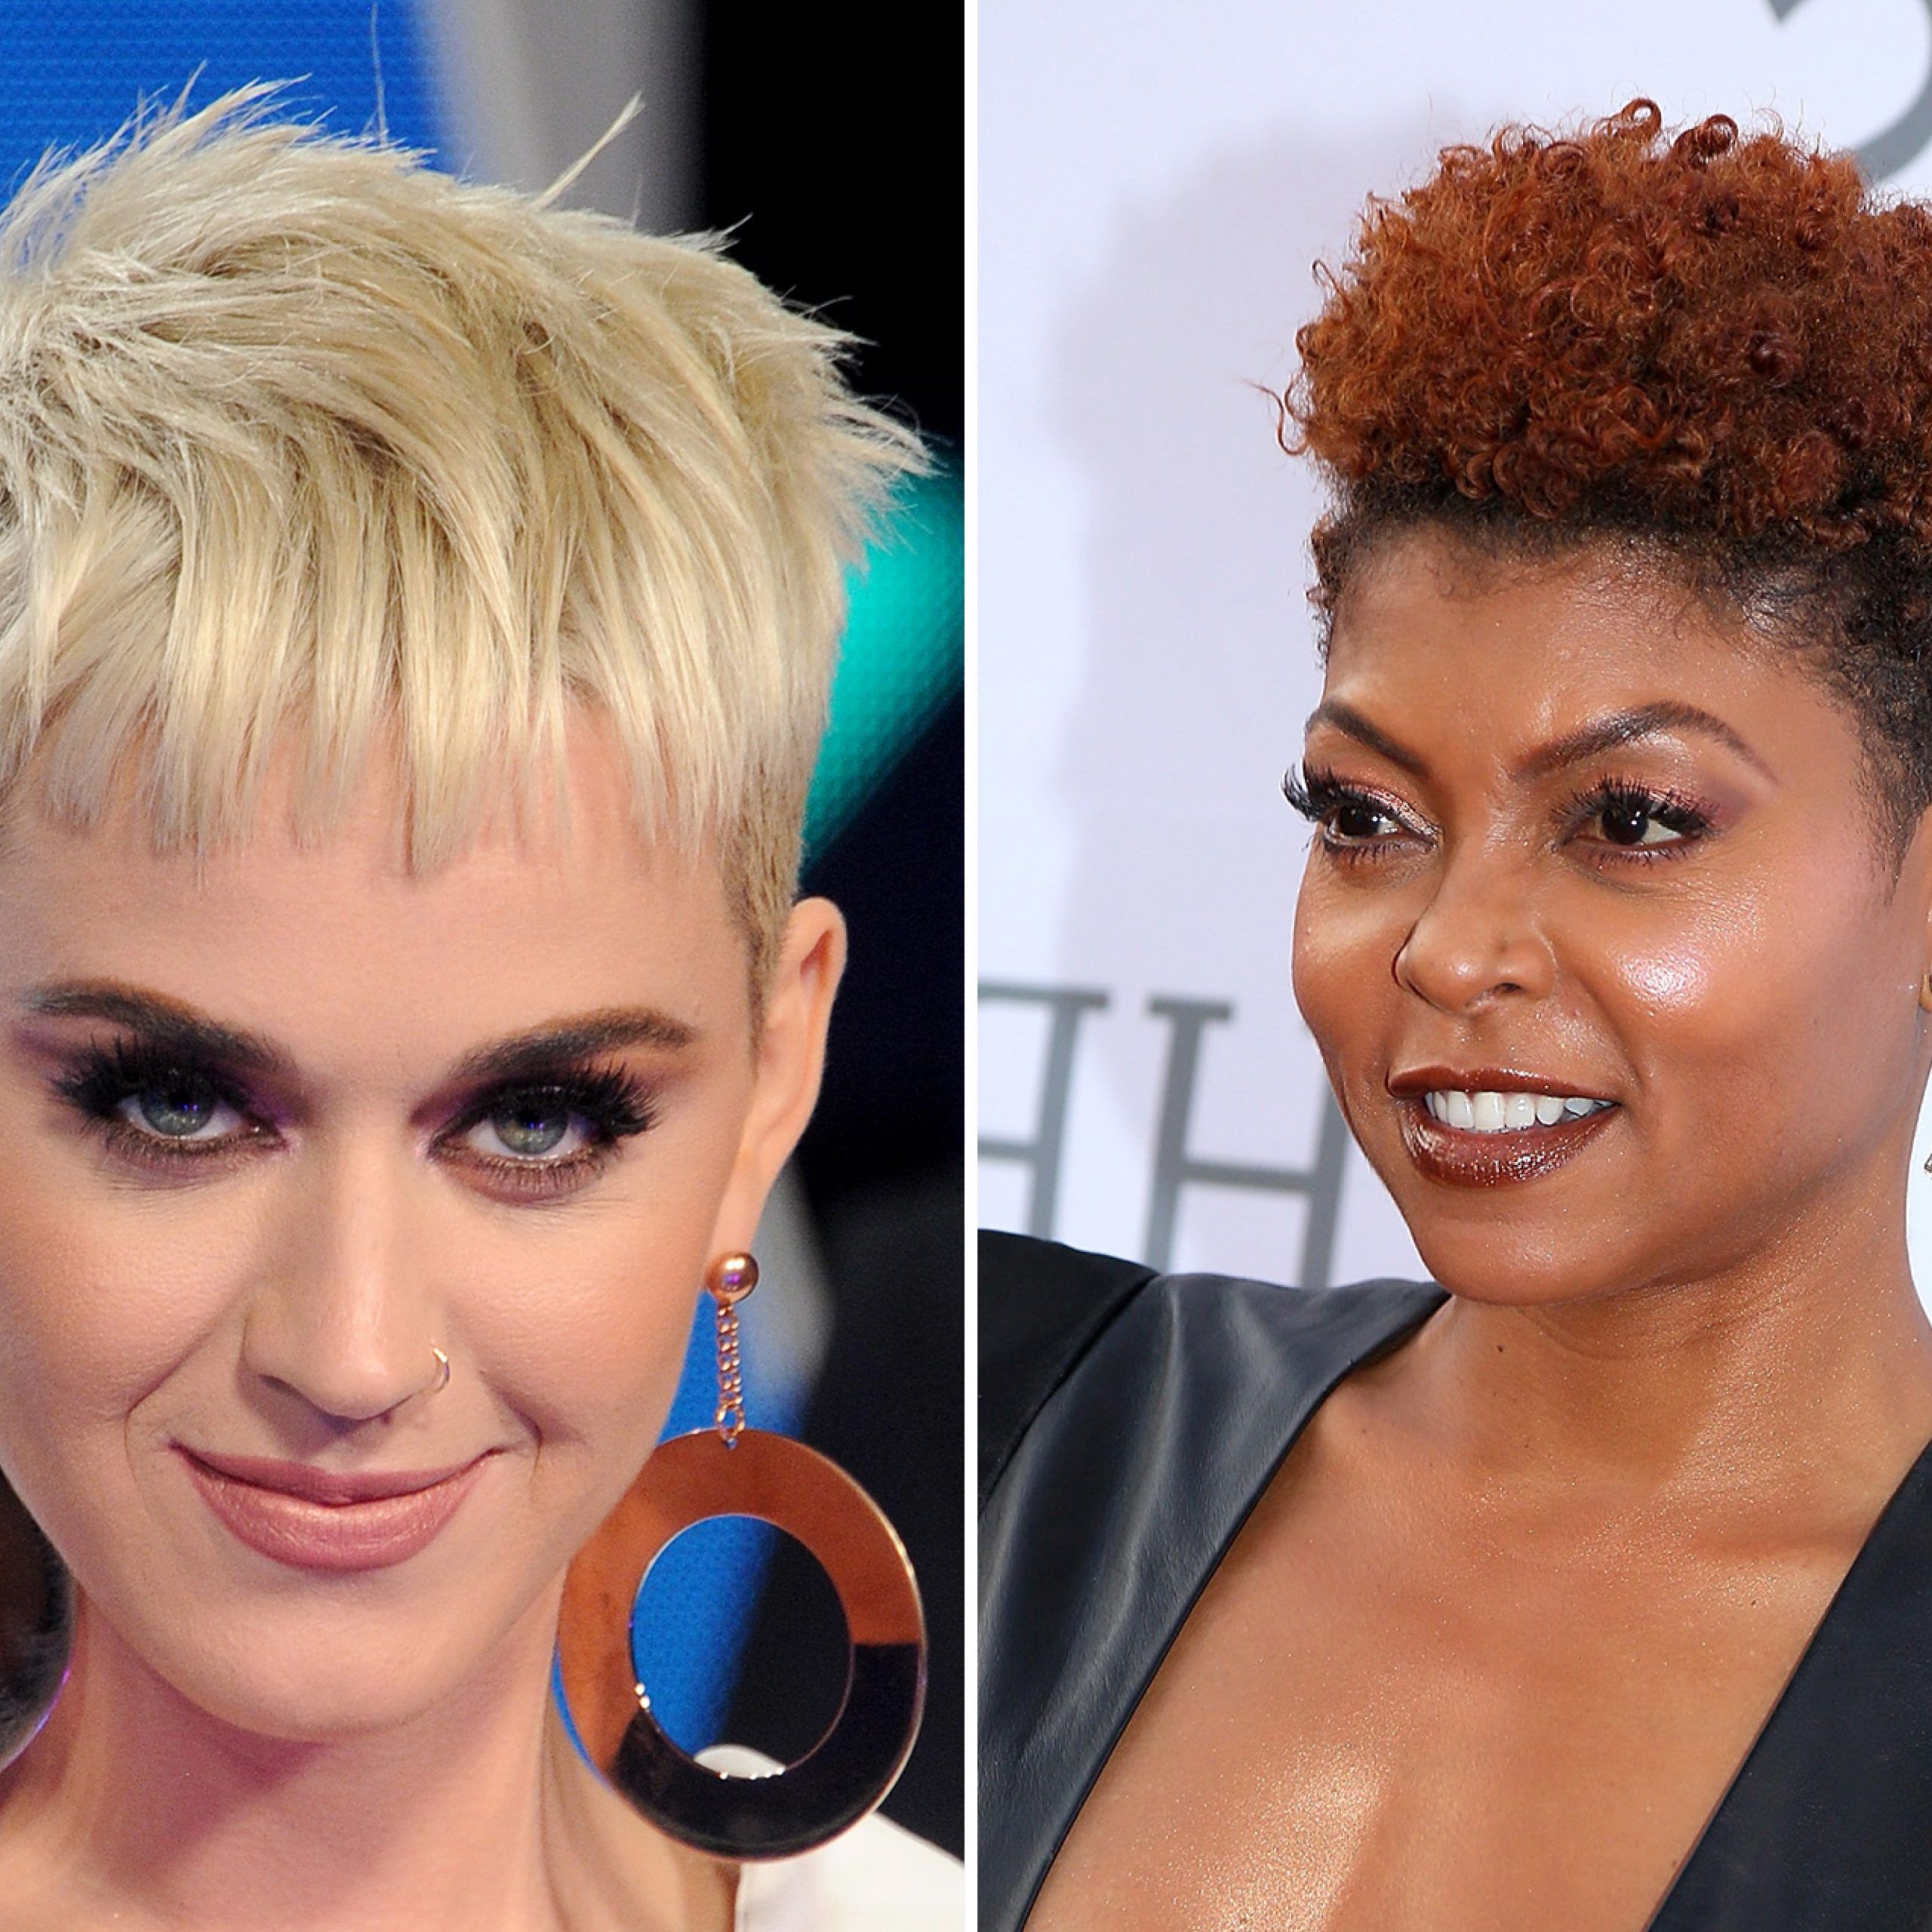 19 Best Pixie Cuts Of 2019 – Celebrity Pixie Hairstyle Ideas Inside Messy Highlighted Pixie Haircuts With Long Side Bangs (Gallery 20 of 20)